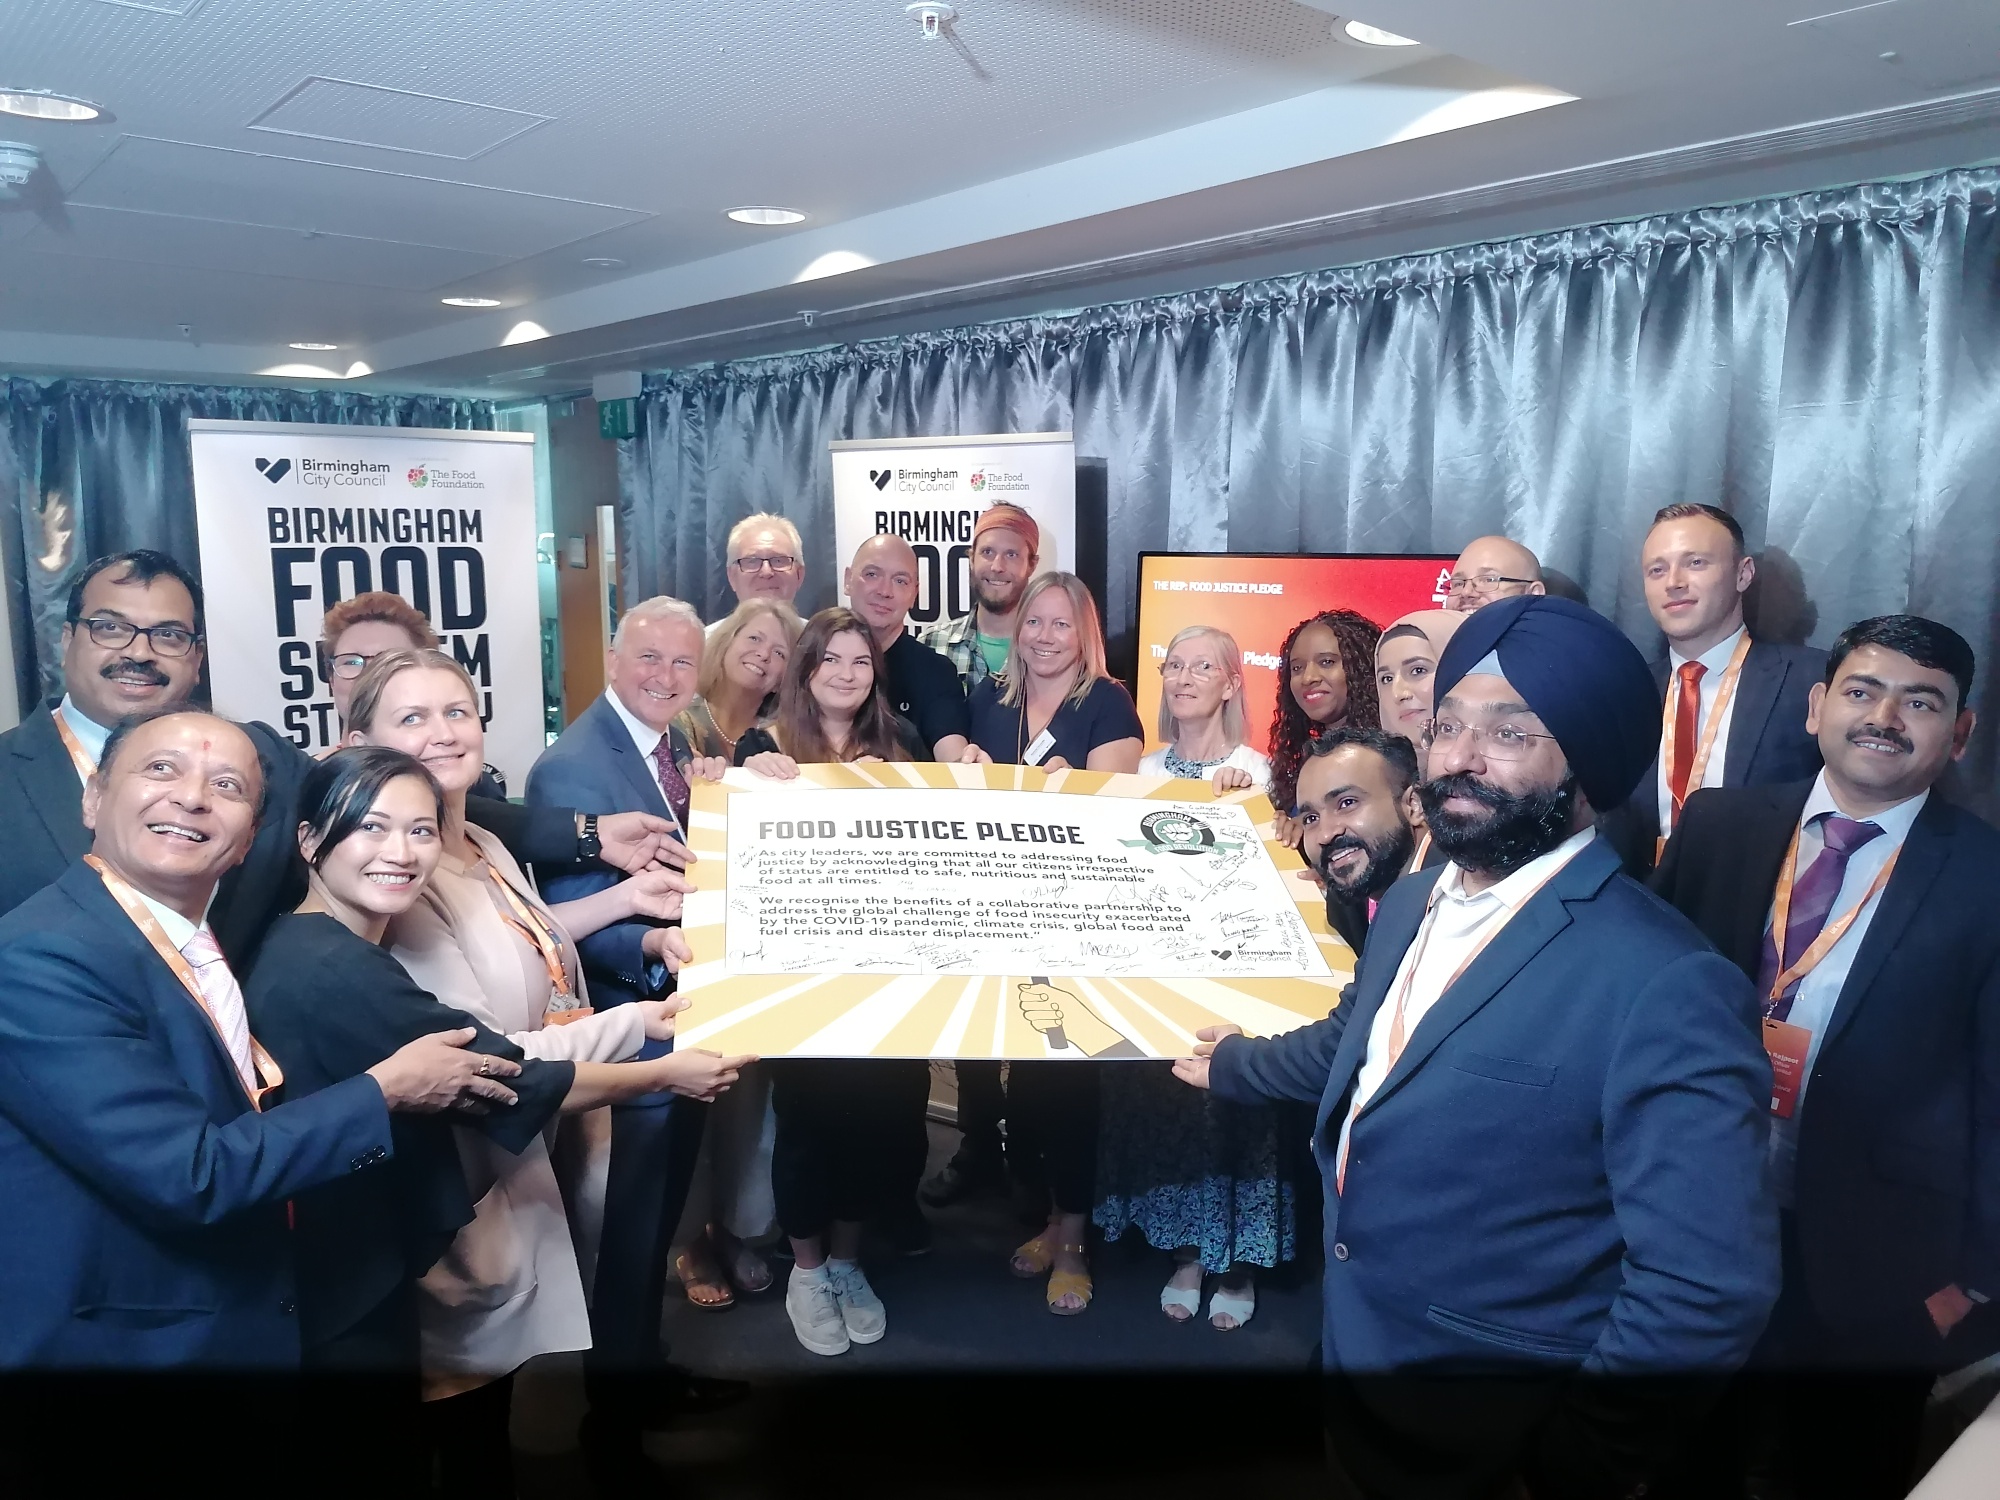 City leaders and officials signed the Food Justice Pledge